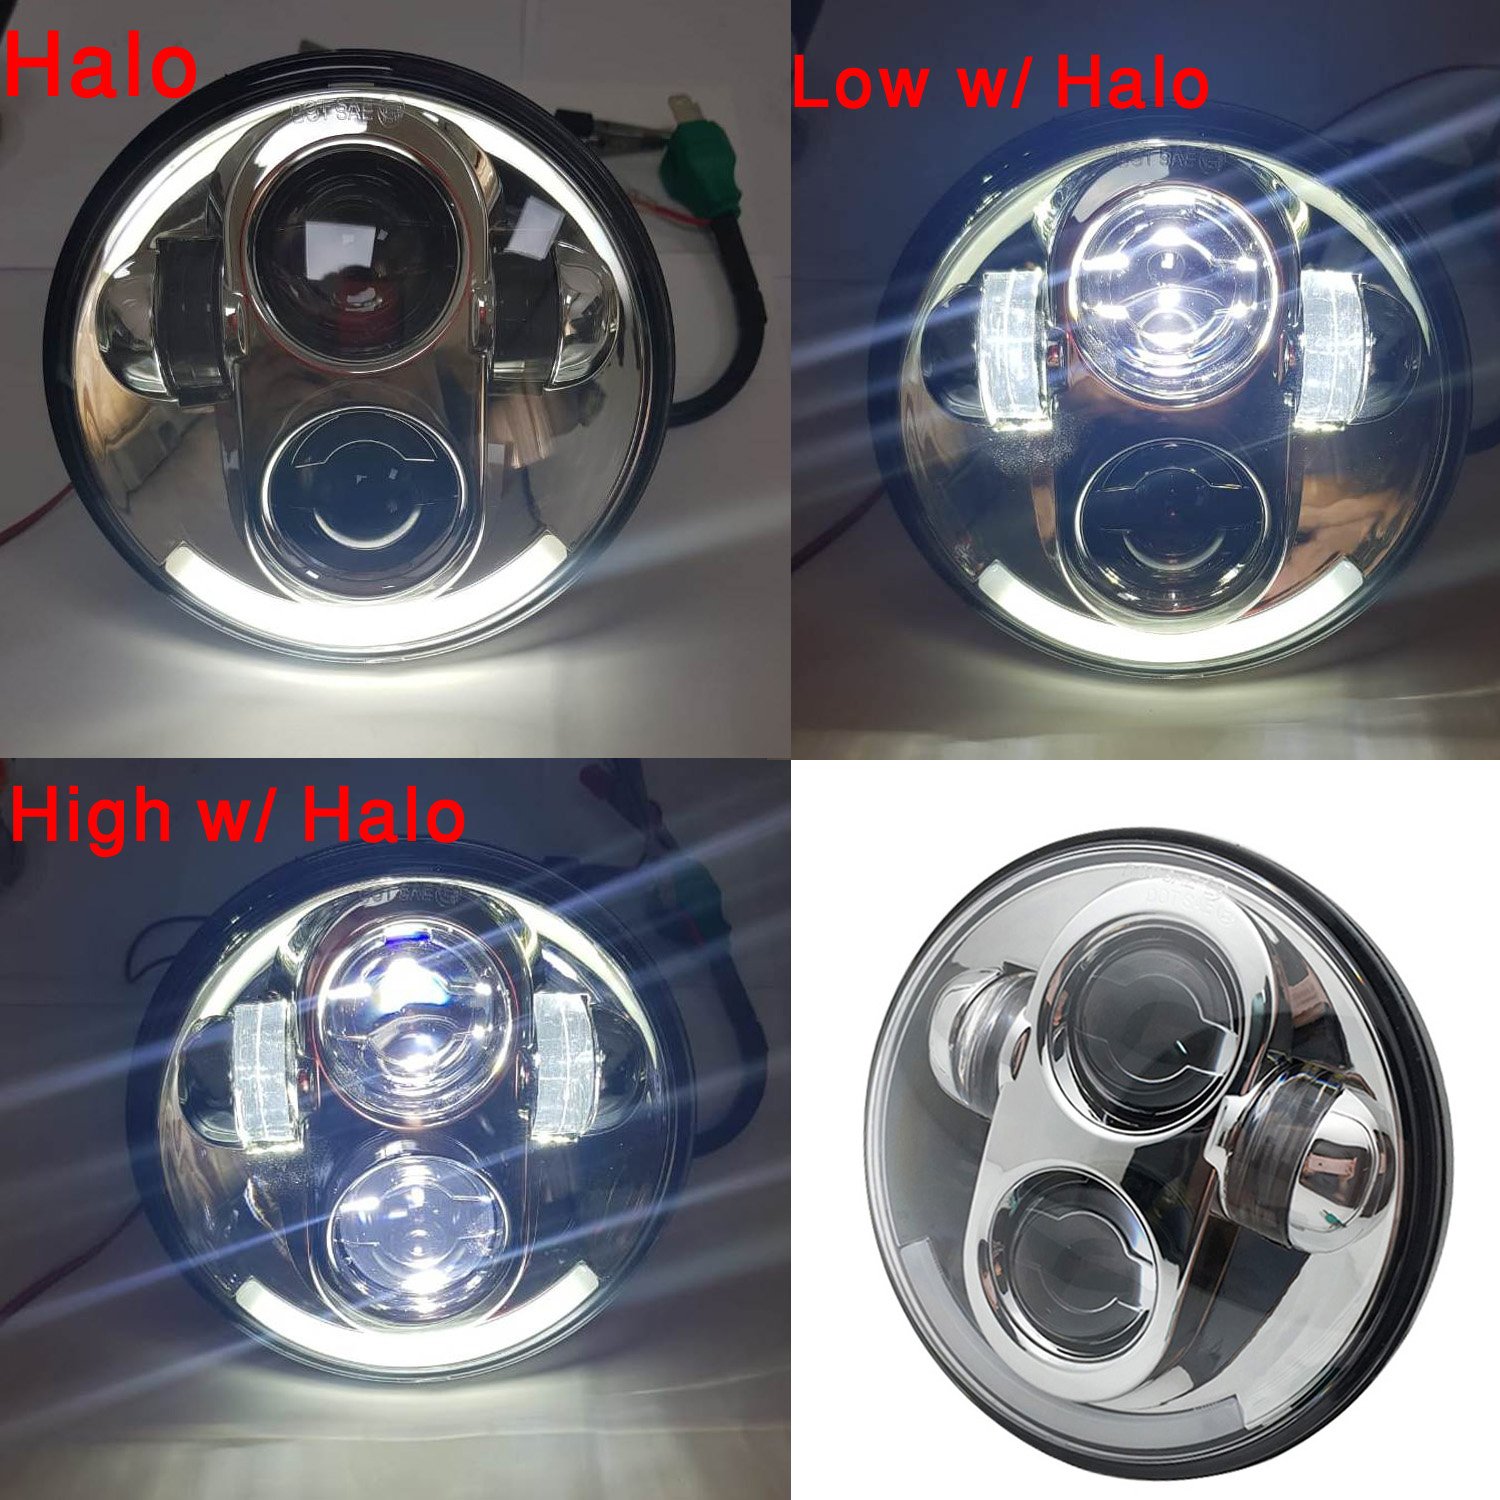 5.75 LED Headlight w/ Half Halo Ring DRL fits Harley Sportster